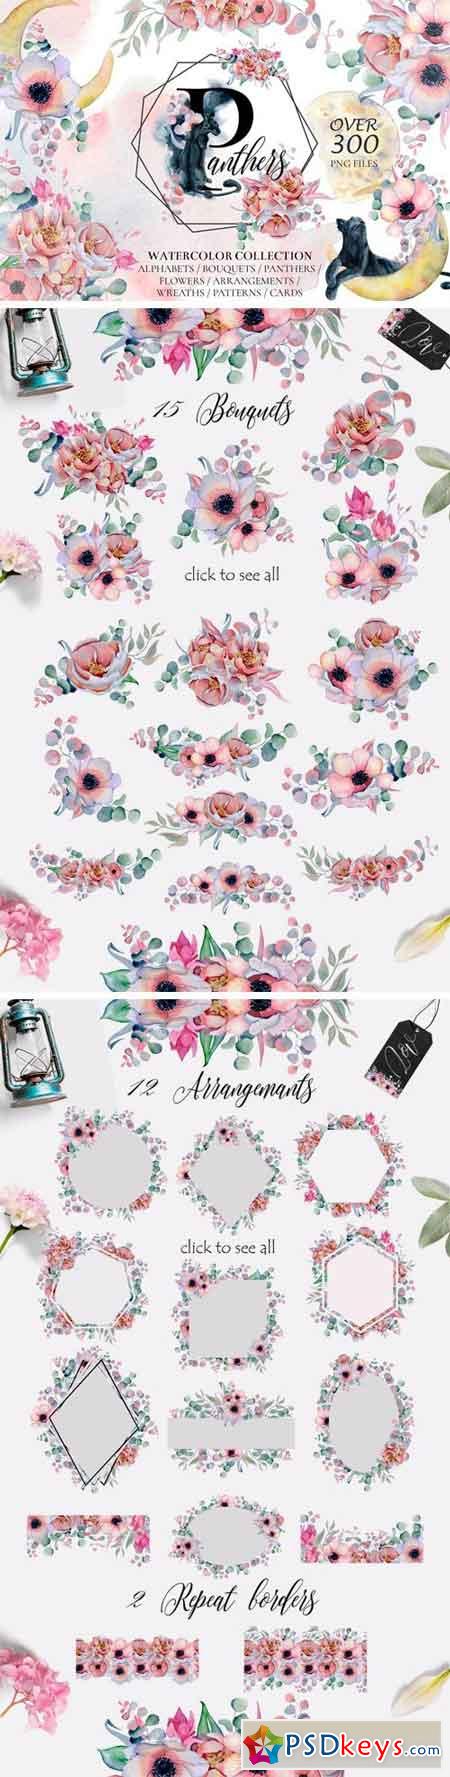 Panthers & Floral Watercolor Set 2509961